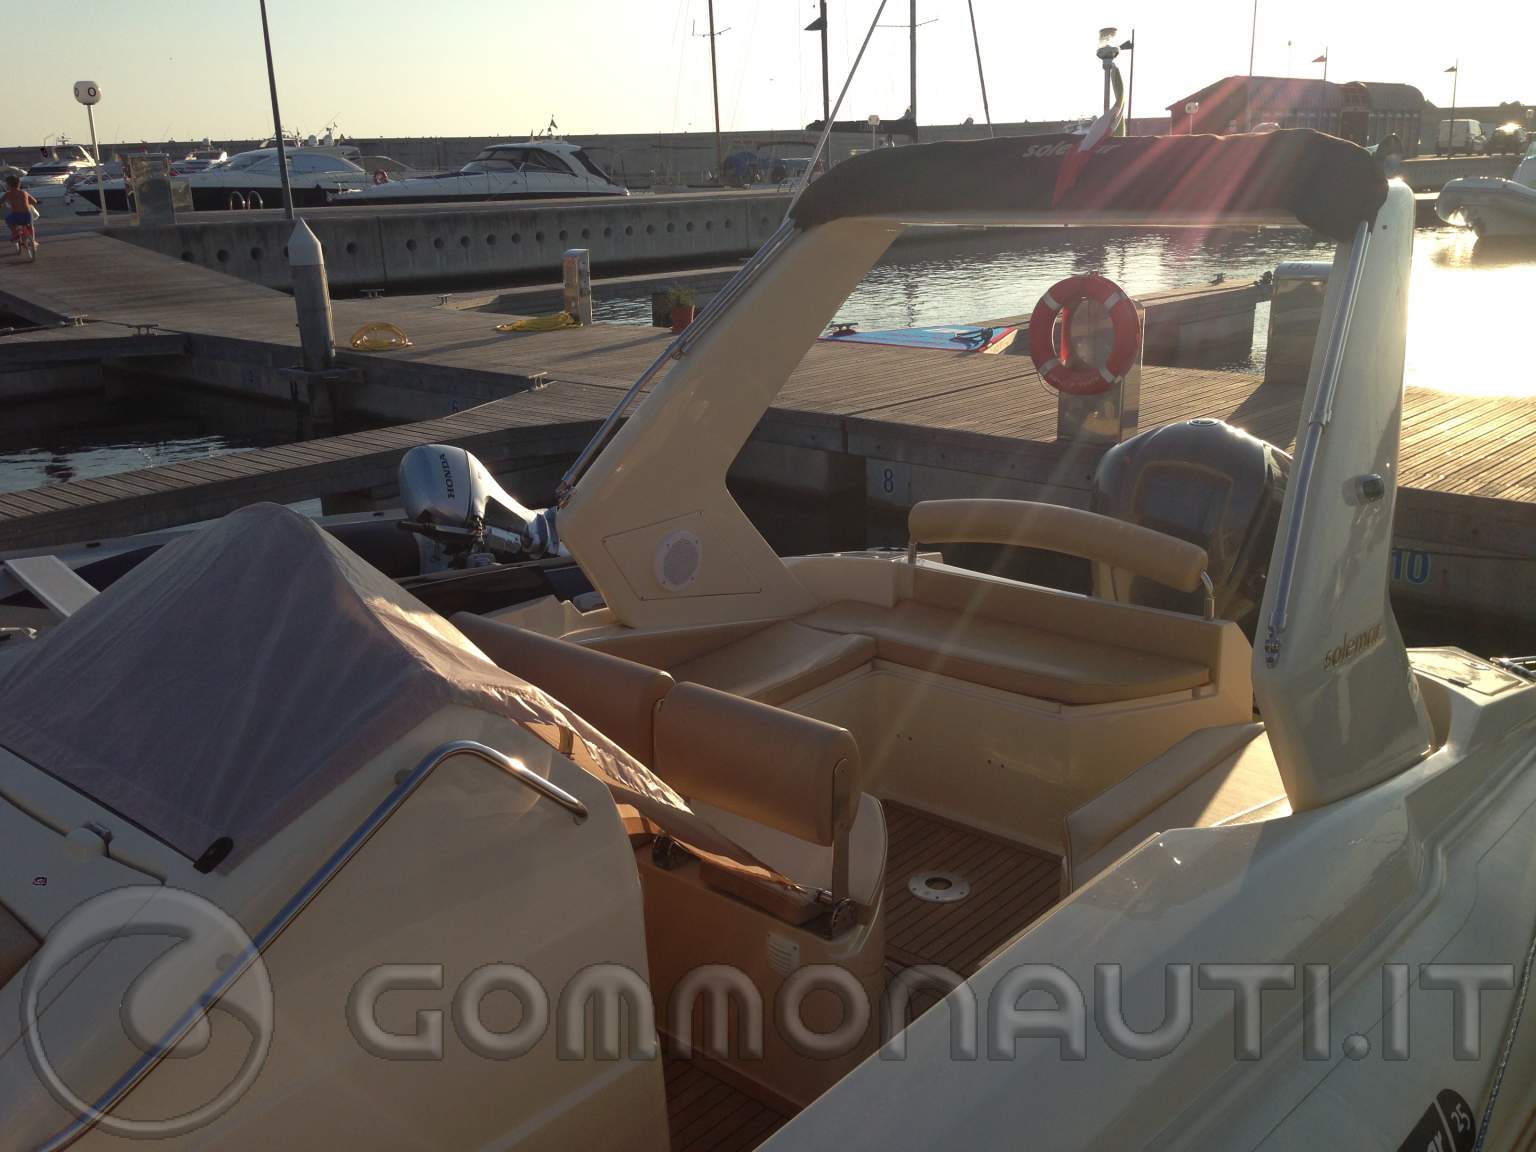 Gommone Solemar Offshore 25.1 Yamaha F300B 300 HP 4 tempi